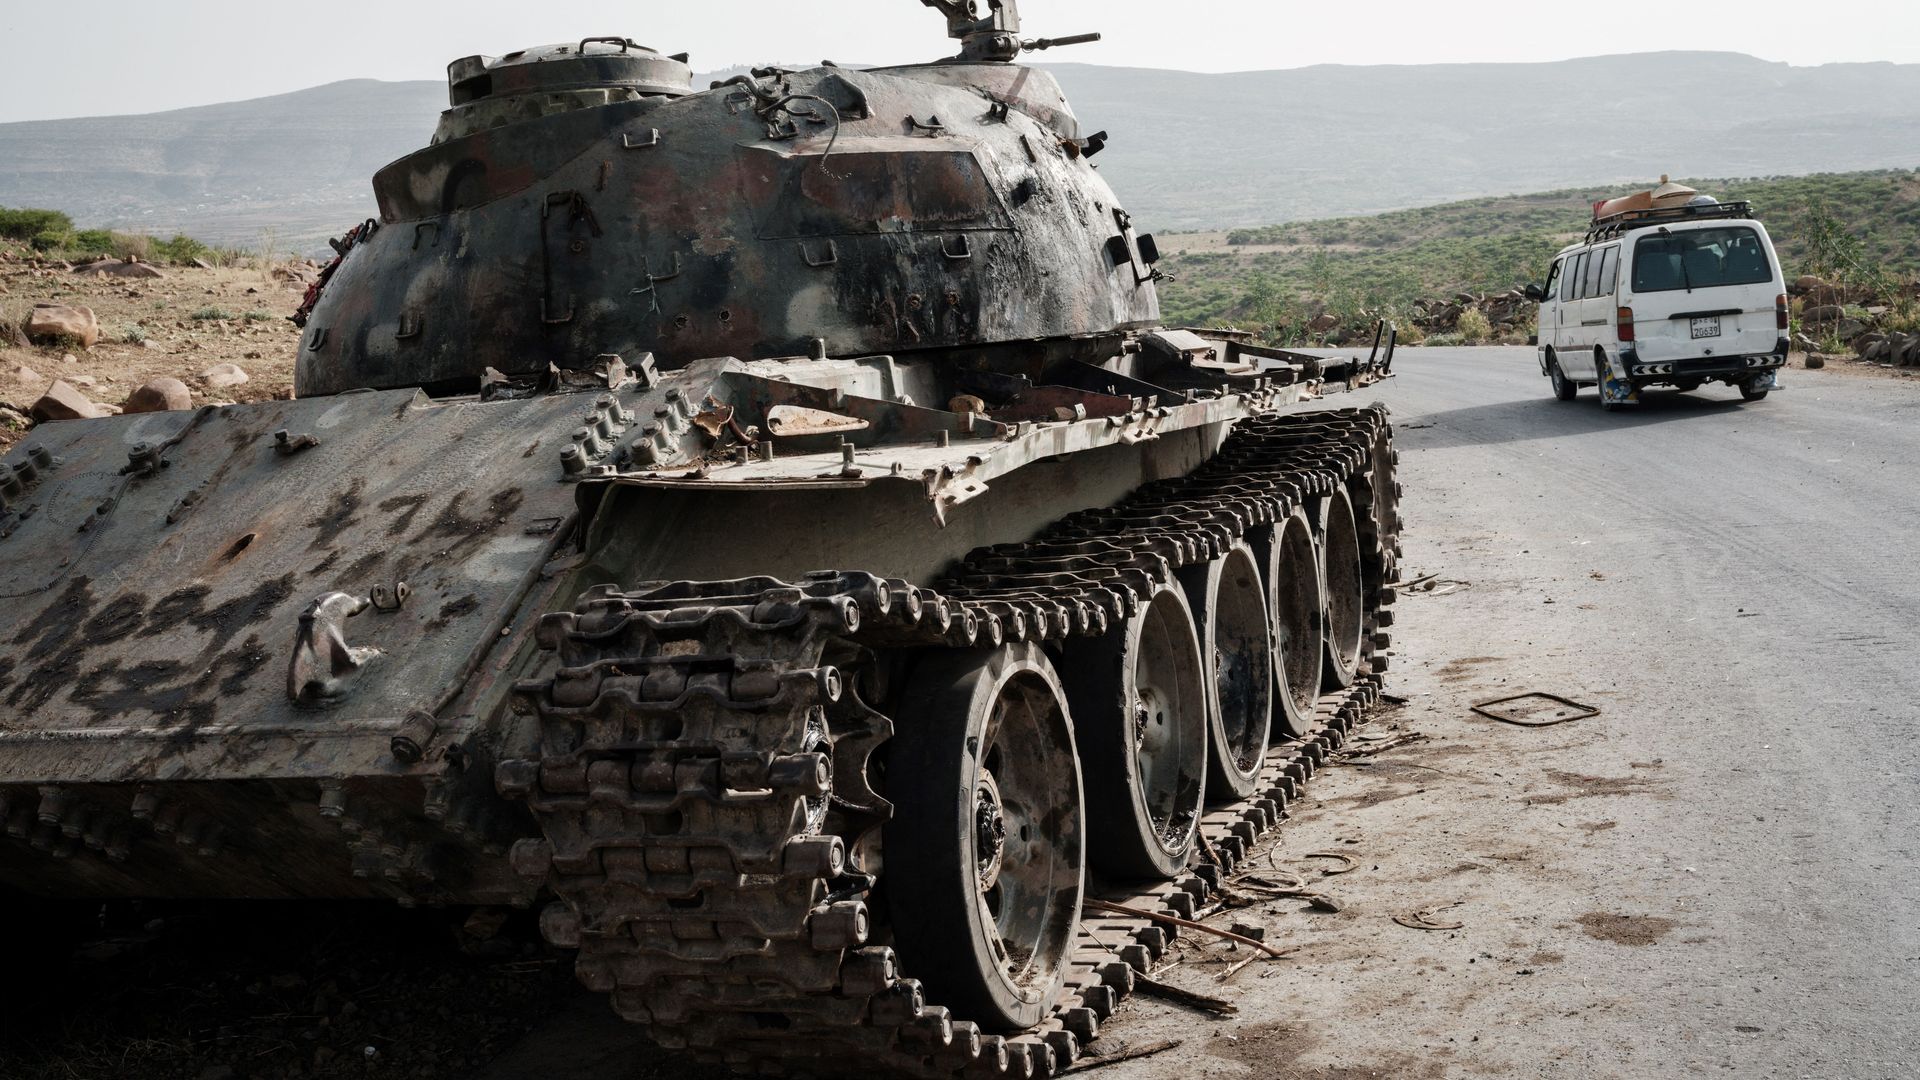 A local transport minibus passes a tank of alledged Eritrean army abandoned along the road in Dansa, southwest of Mekele in Tigray region, Ethiopia, on June 20, 2021.